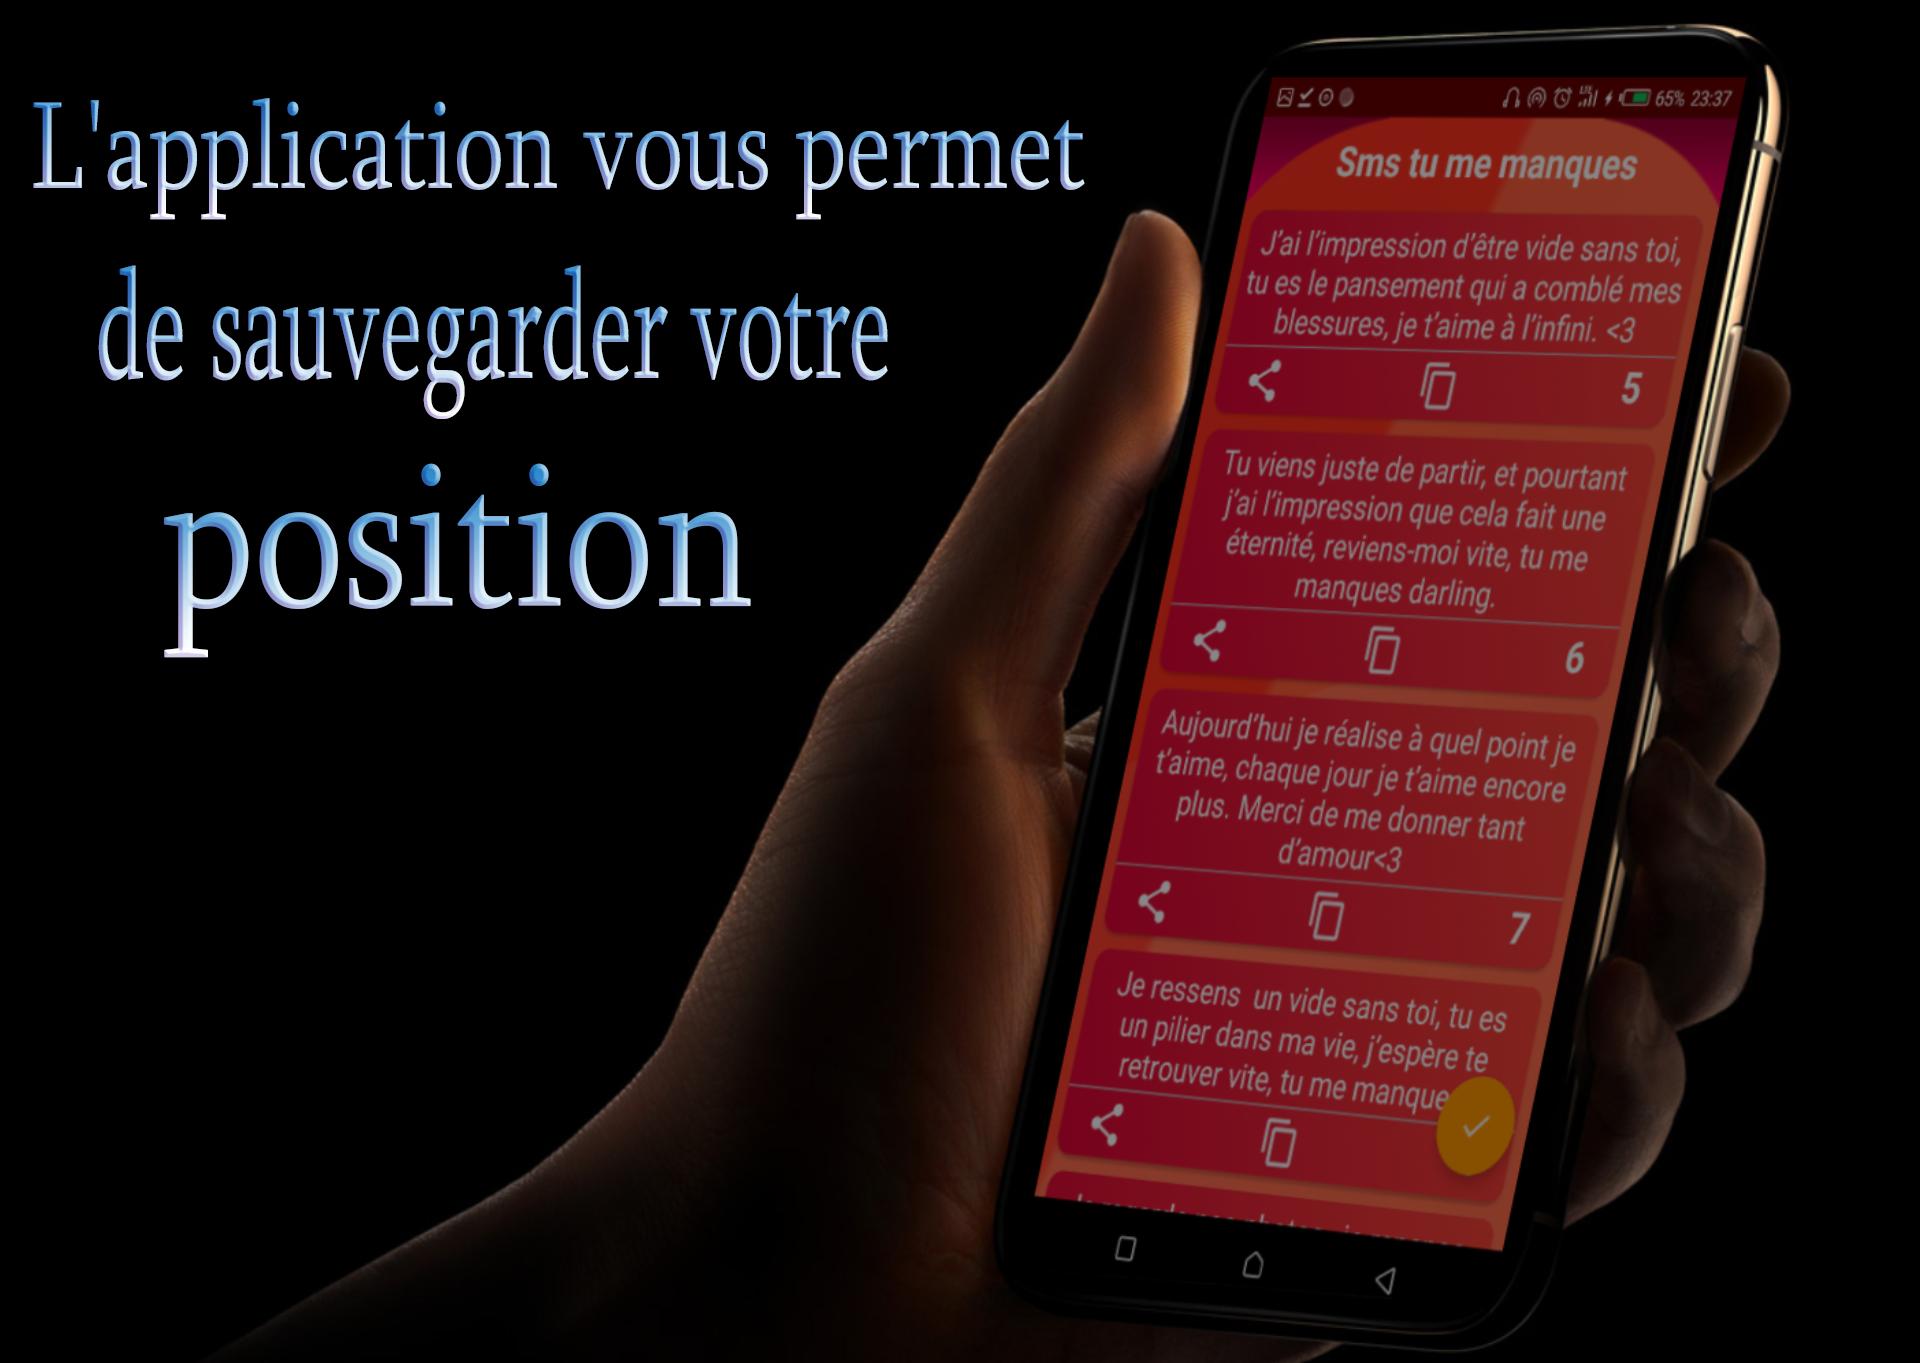 Sms Tu Me Manque For Android Apk Download